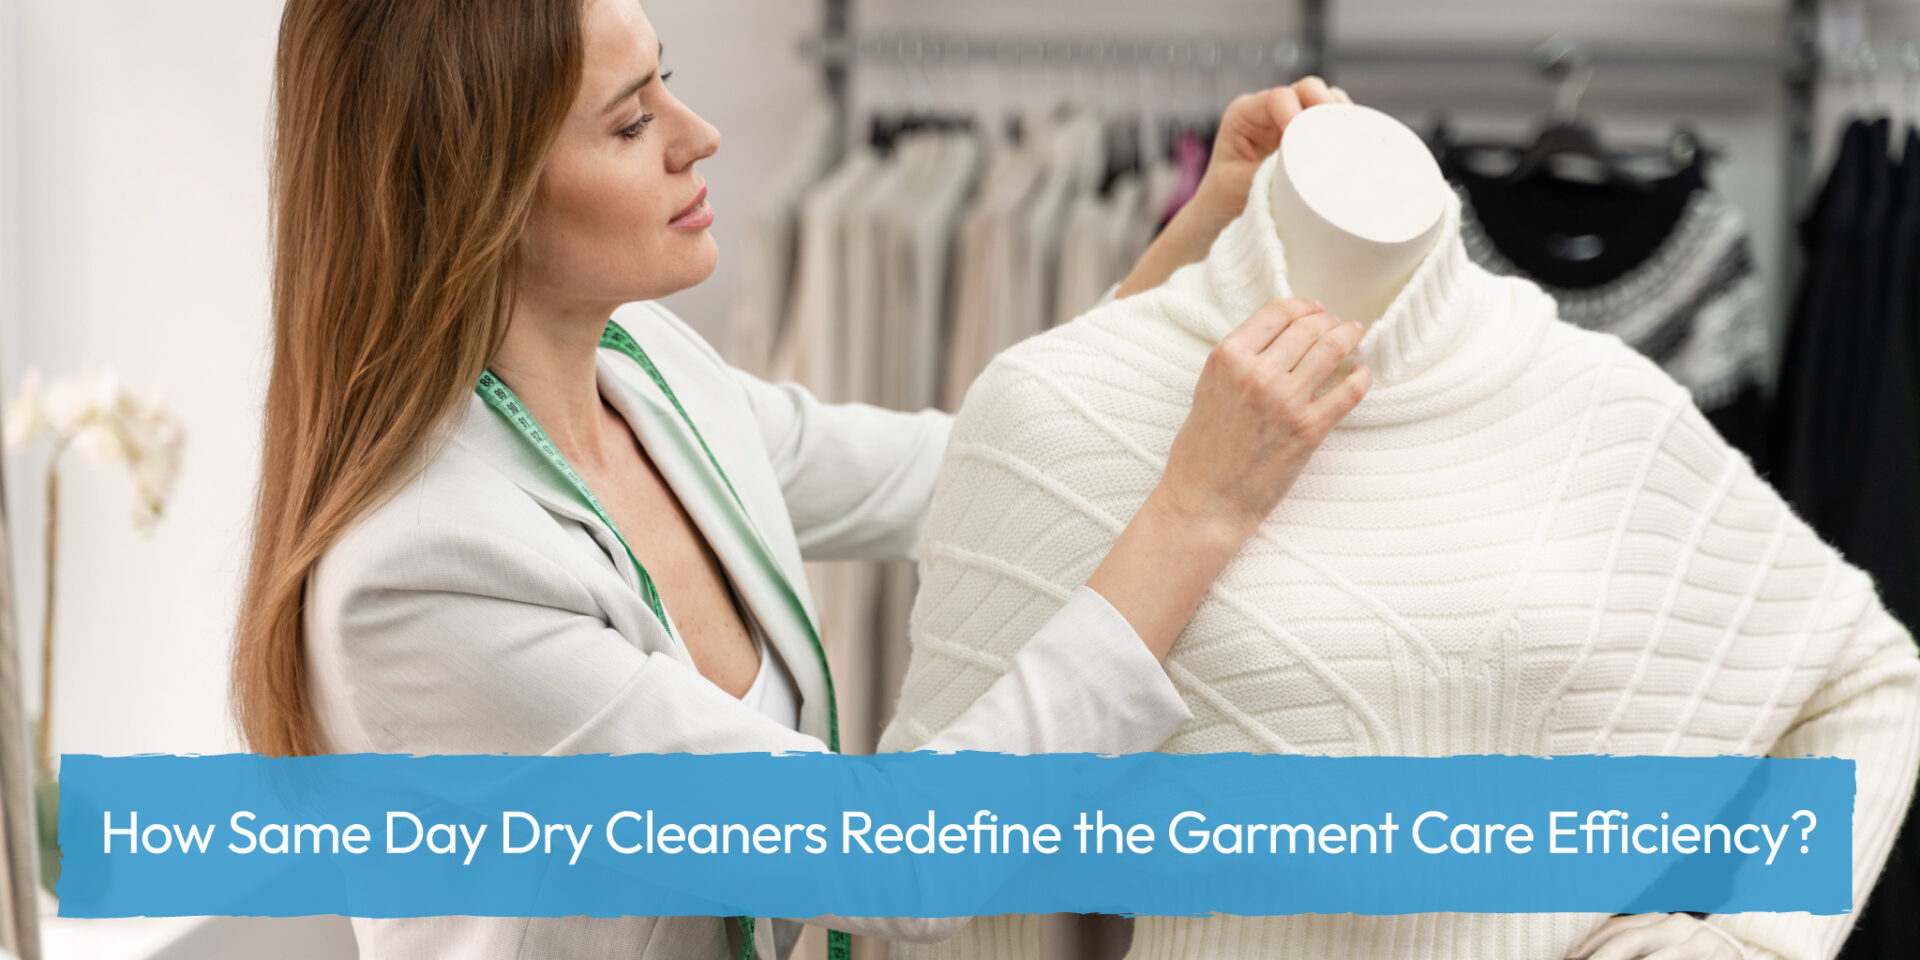 How Same Day Dry Cleaners Redefine the Garment Care Efficiency?